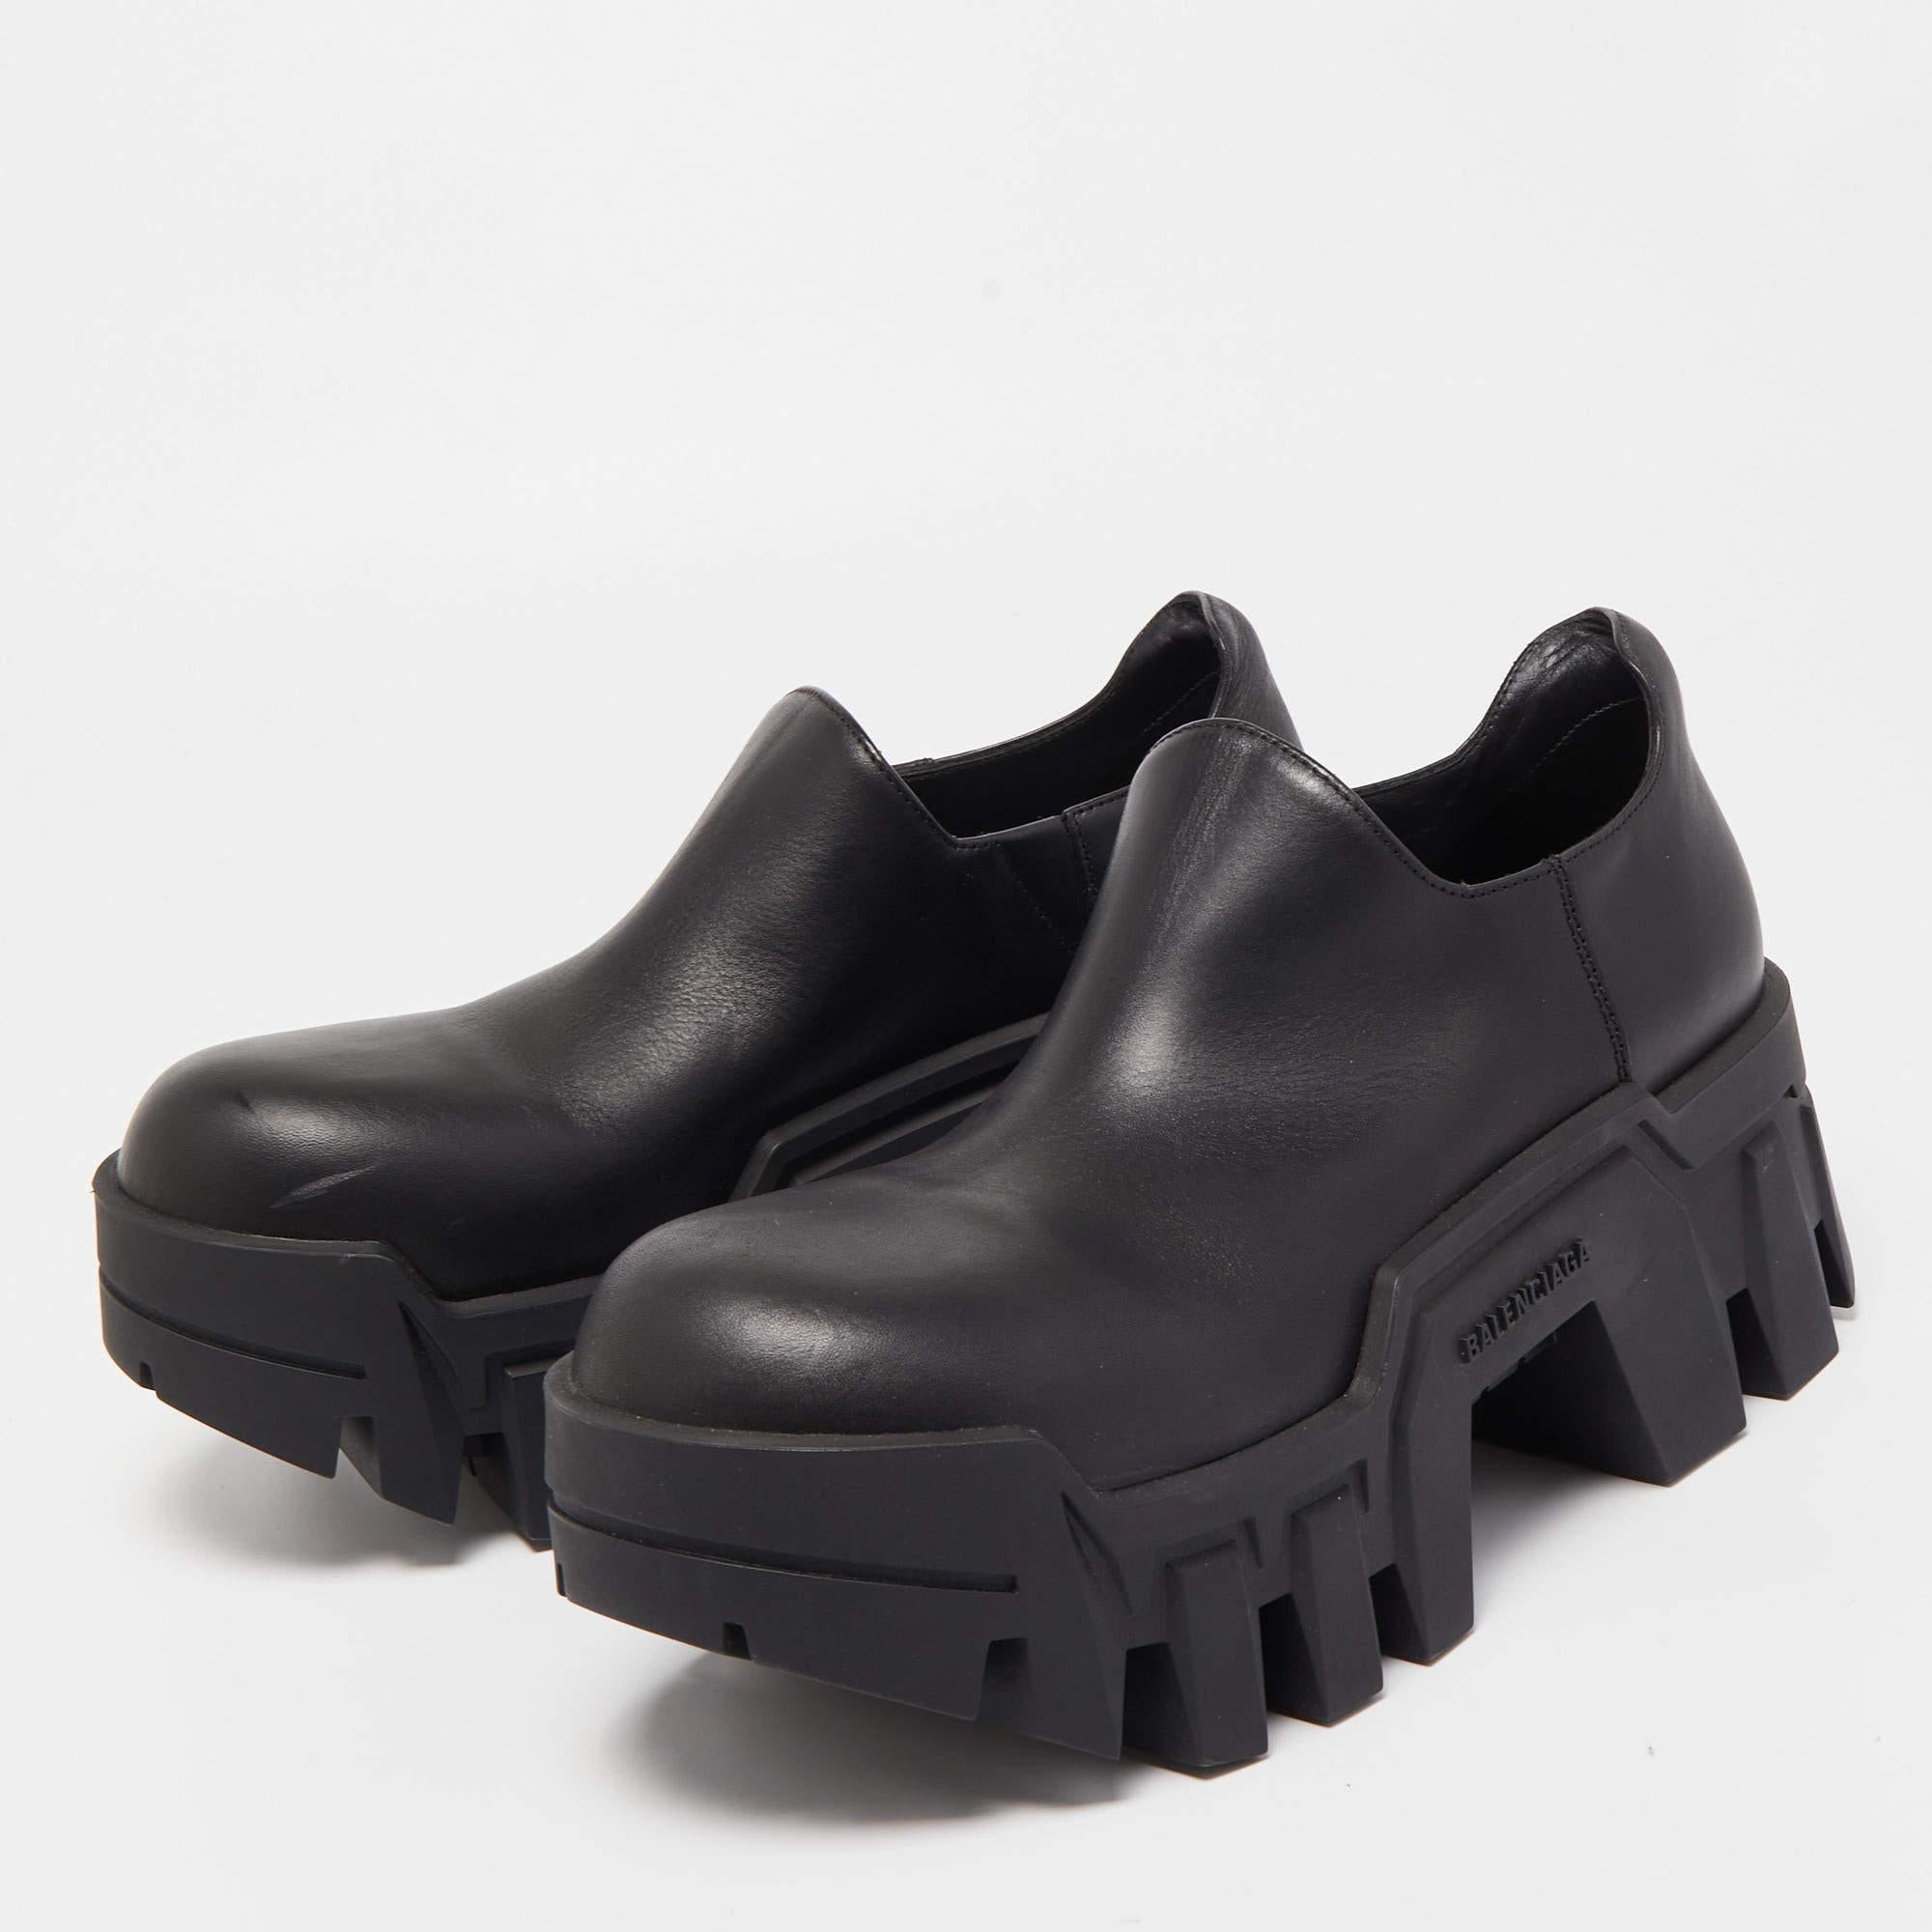 The Balenciaga Bulldozer boots are a fashion statement with their sleek black leather construction. These ankle boots feature a chunky sole reminiscent of a bulldozer tread, adding an edgy and distinctive touch to any outfit.

